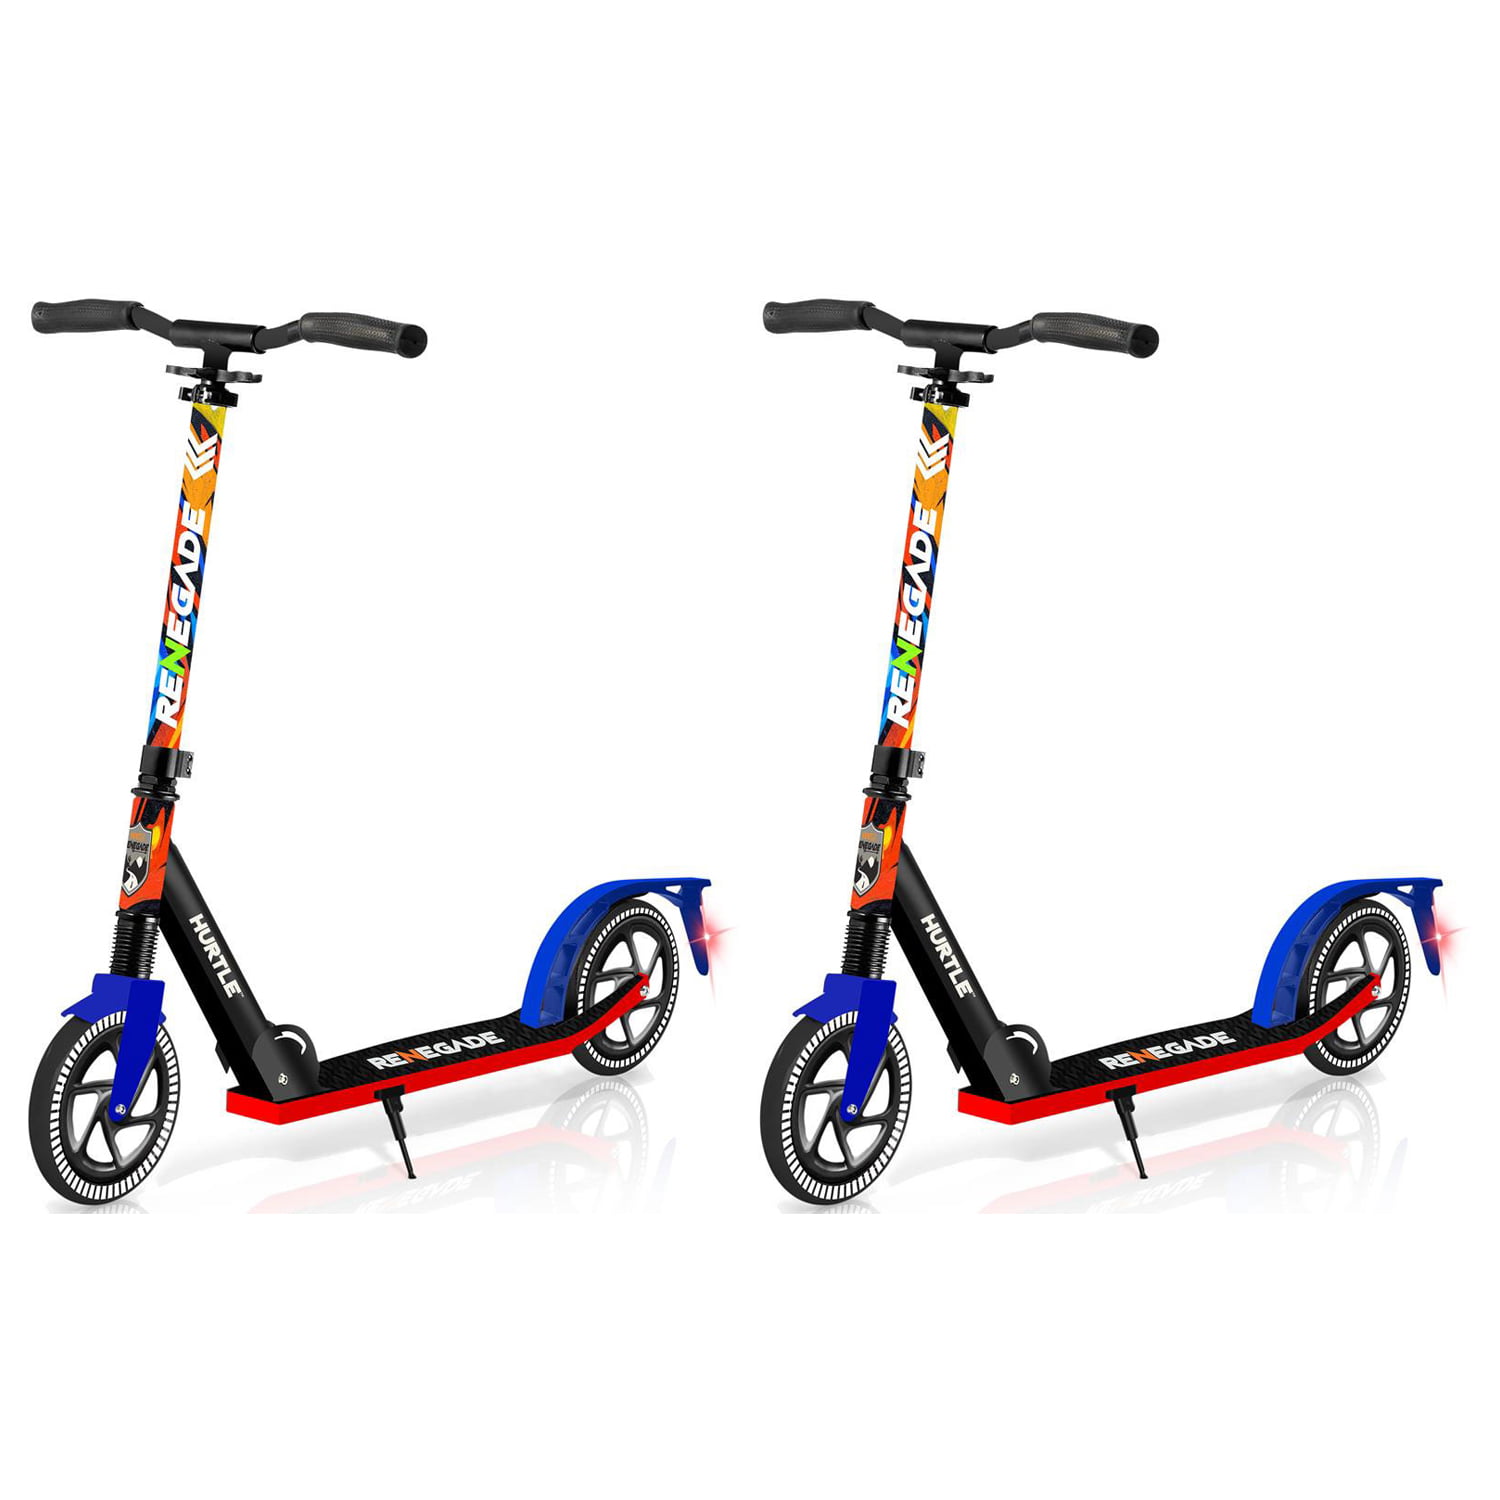 CAROMA Adult Scooter with Dual Suspension Folding Kick Scooter Push Scooters UK 